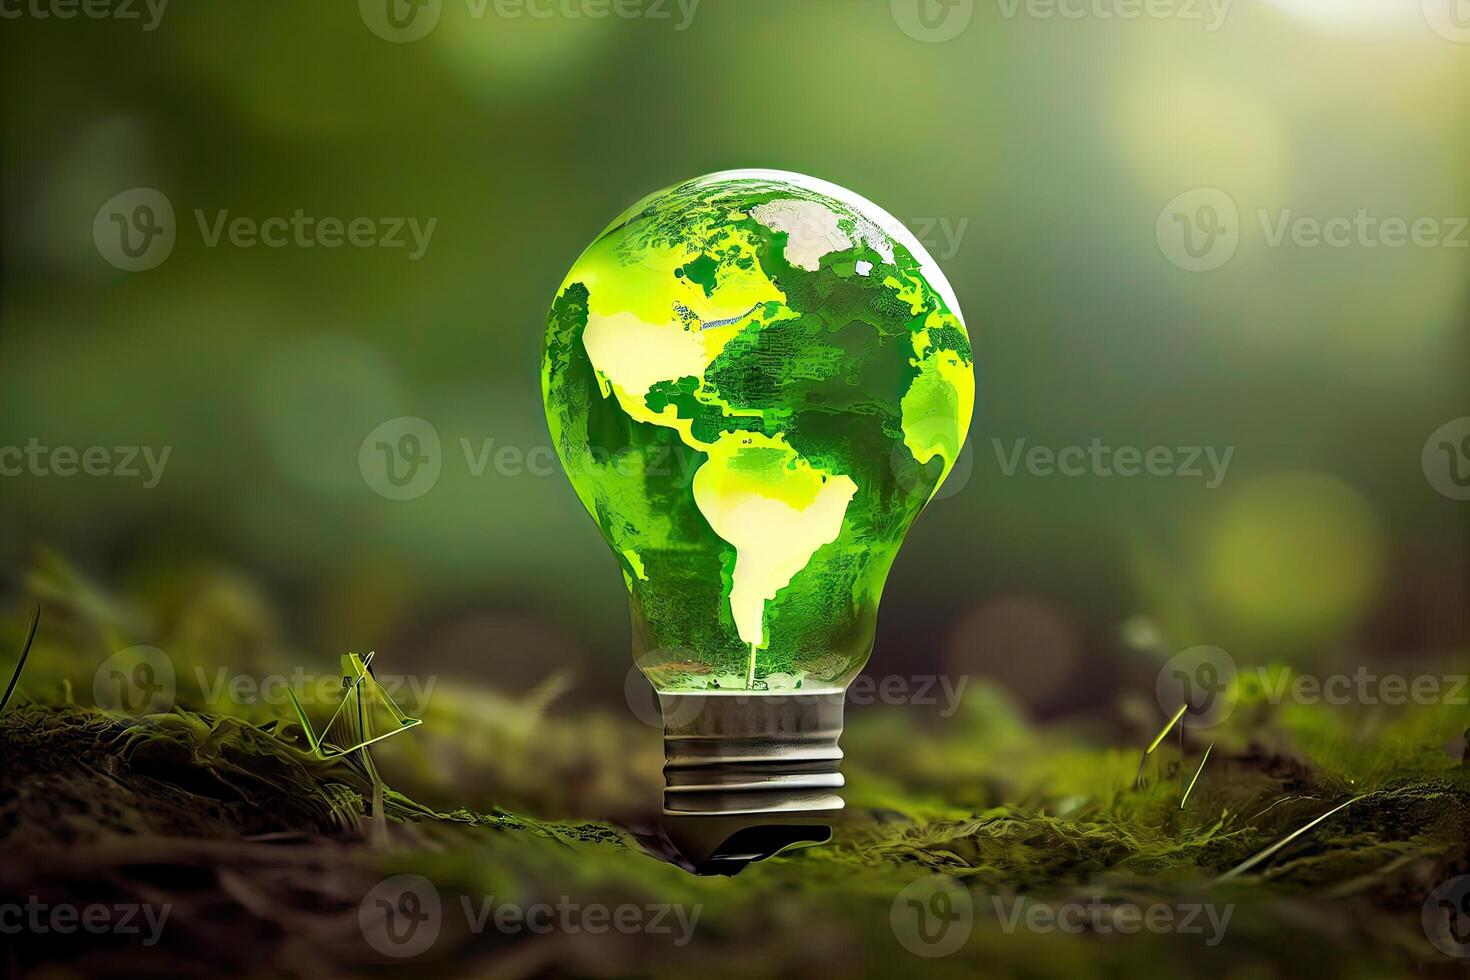 Environmental protection, renewable, sustainable energy sources. The green world map is on a light bulb that represents green energy Renewable energy that is important to the world. photo